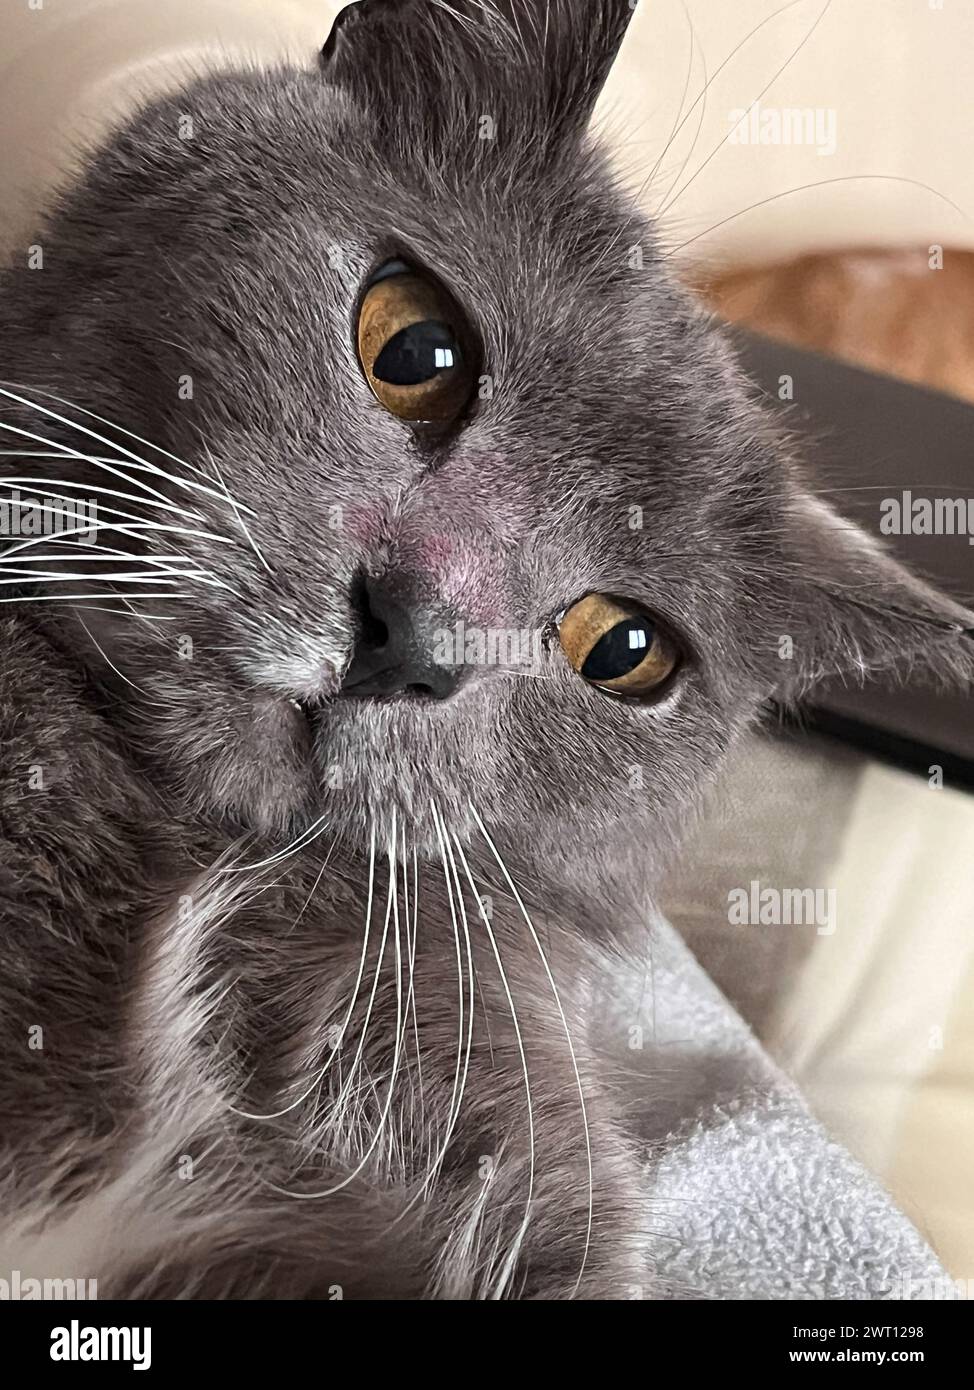 close up muzzle of grey Carthusian cat with bewildered expression Stock Photo